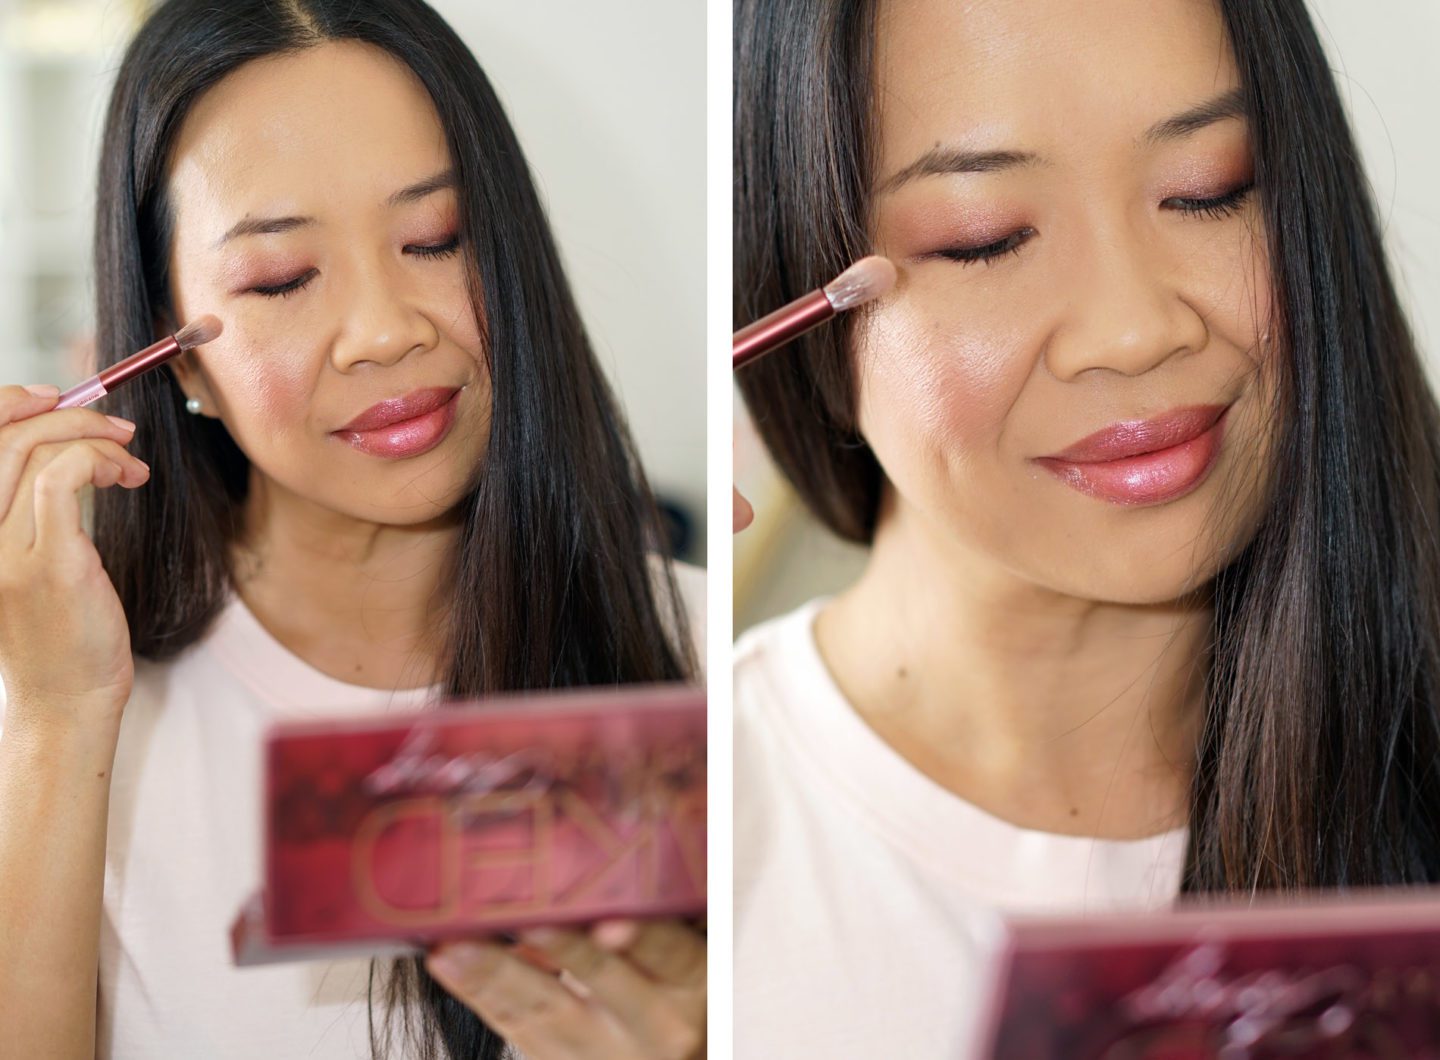 Urban Decay Naked Cherry Eyeshadow Palette Review | The Beauty Look Book